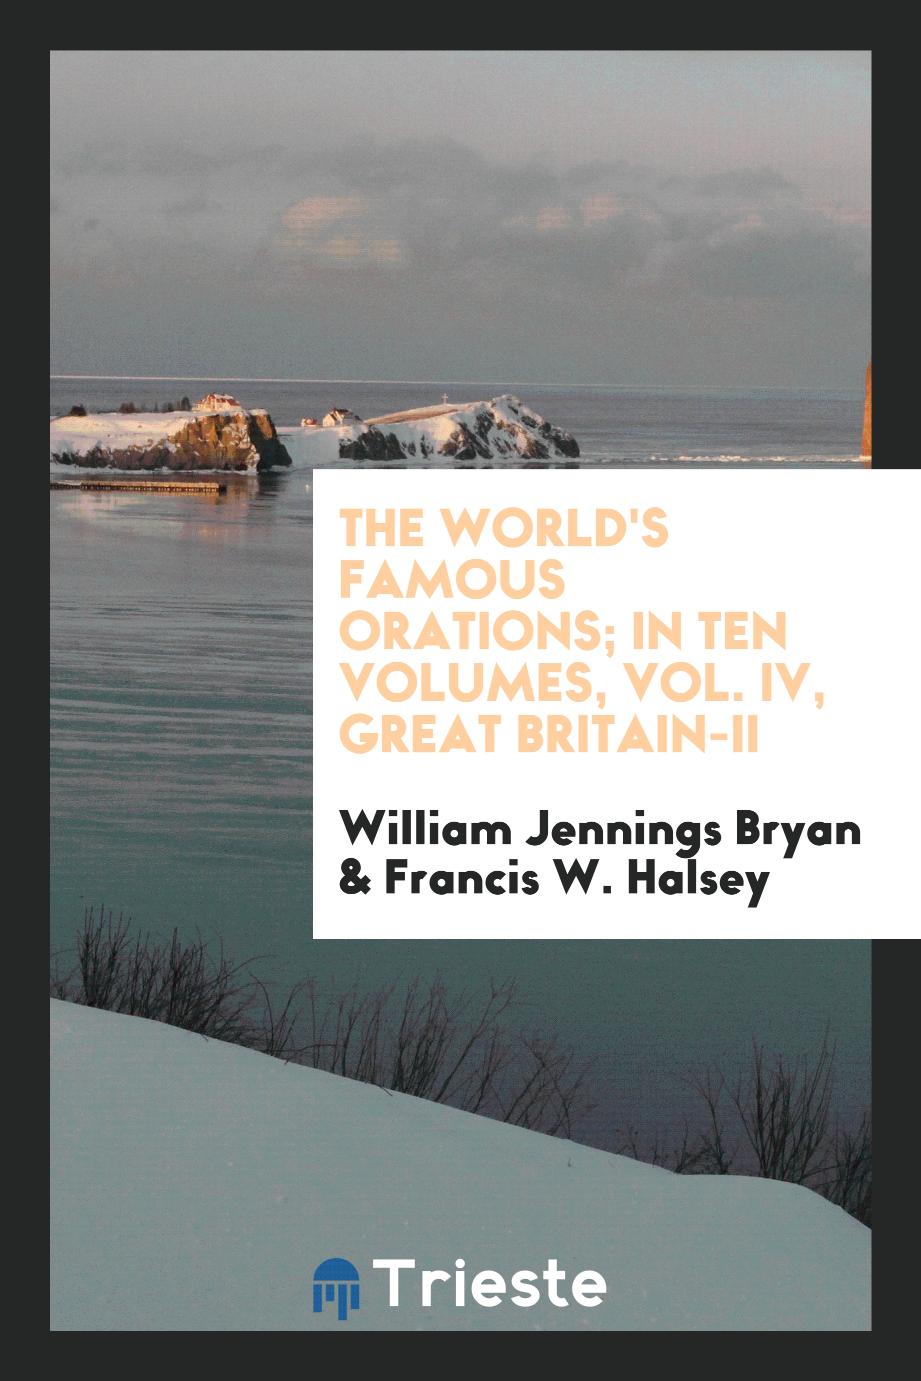 The world's famous orations; in ten volumes, Vol. IV, great Britain-II